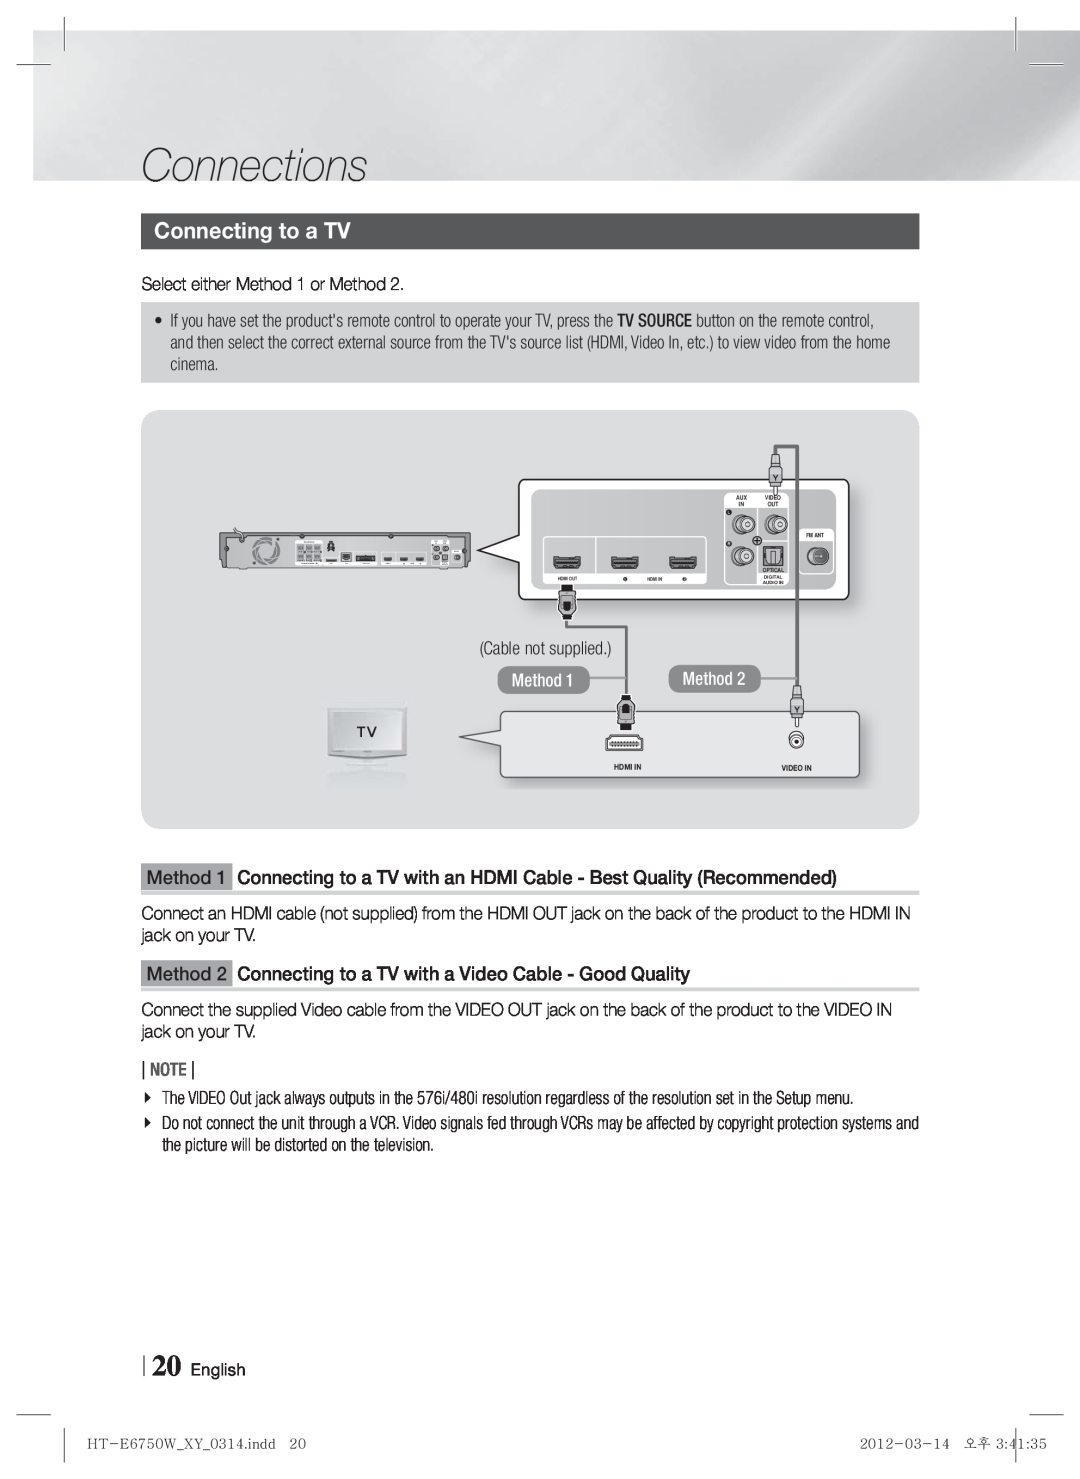 Samsung HT-E6750W user manual Connecting to a TV, Connections, Method, Note 